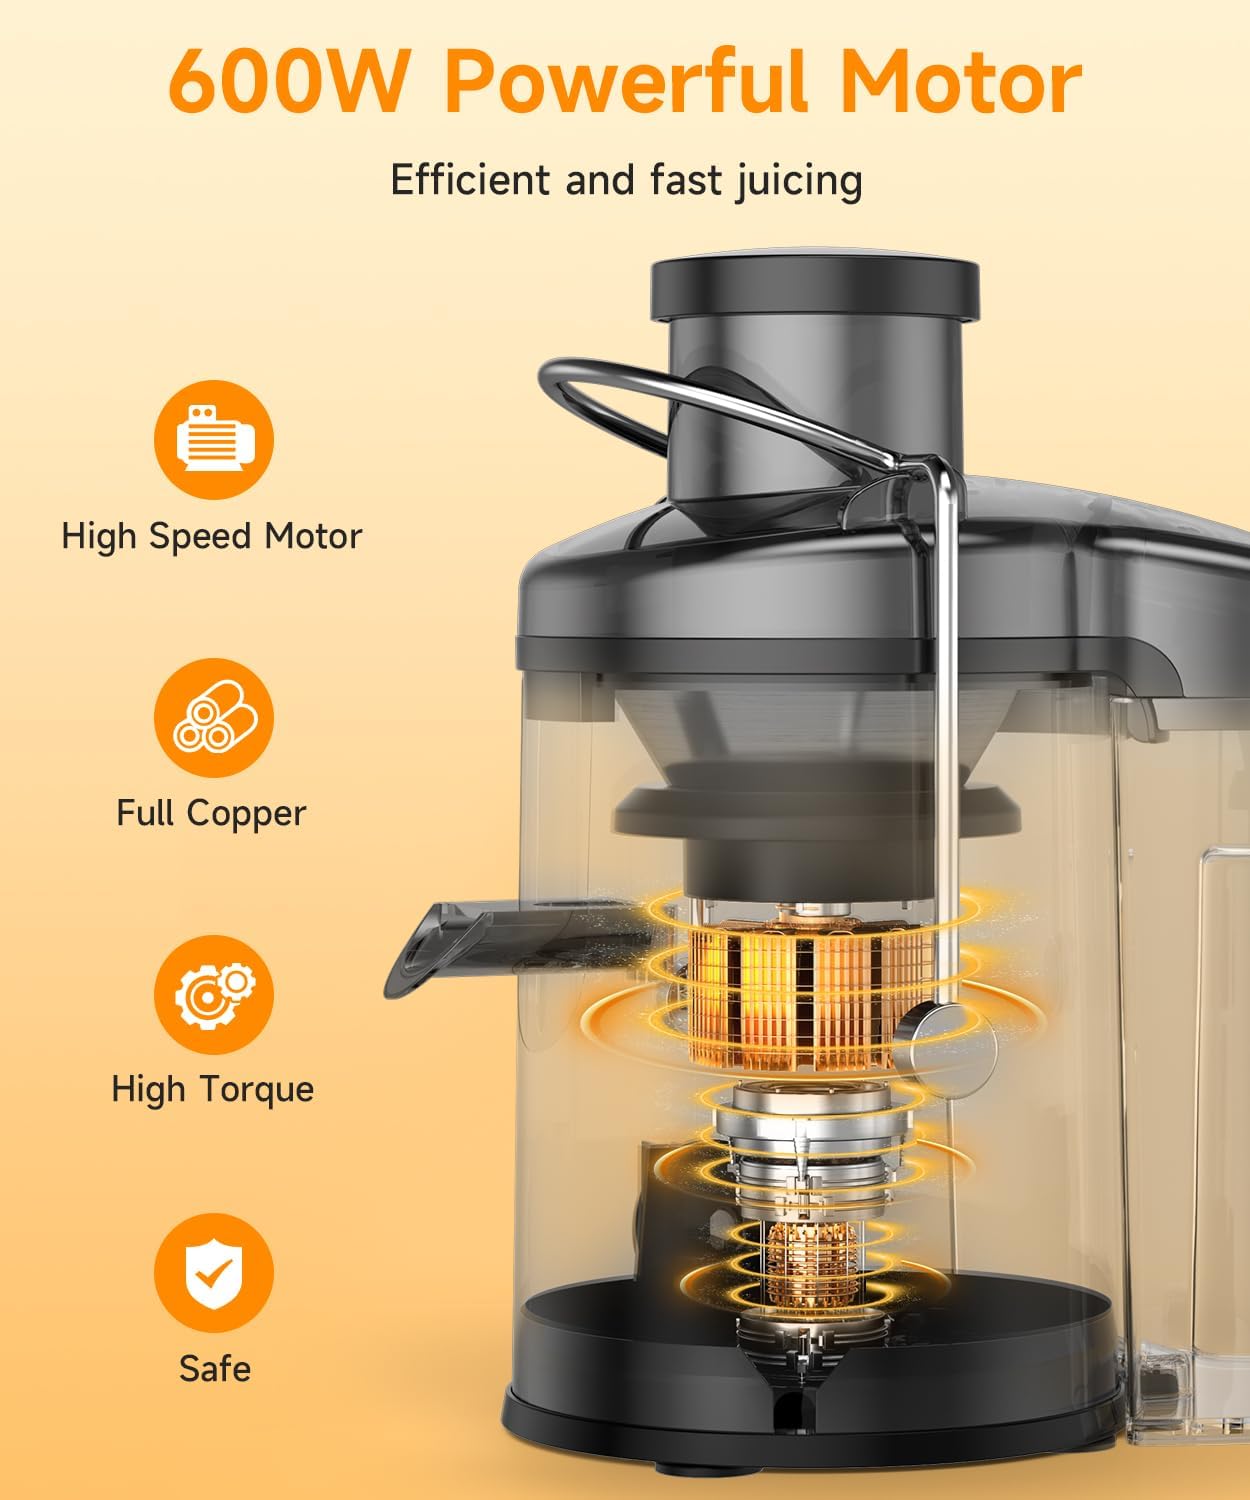 Juicer, 600W Juicer Machine with 3 Inch Wide Chute for Whole Fruits, High Yield Juice Extractor with 3 Speeds, Easy to Clean with Cleaning Brush, Compact Centrifugal Juicer Anti-drip